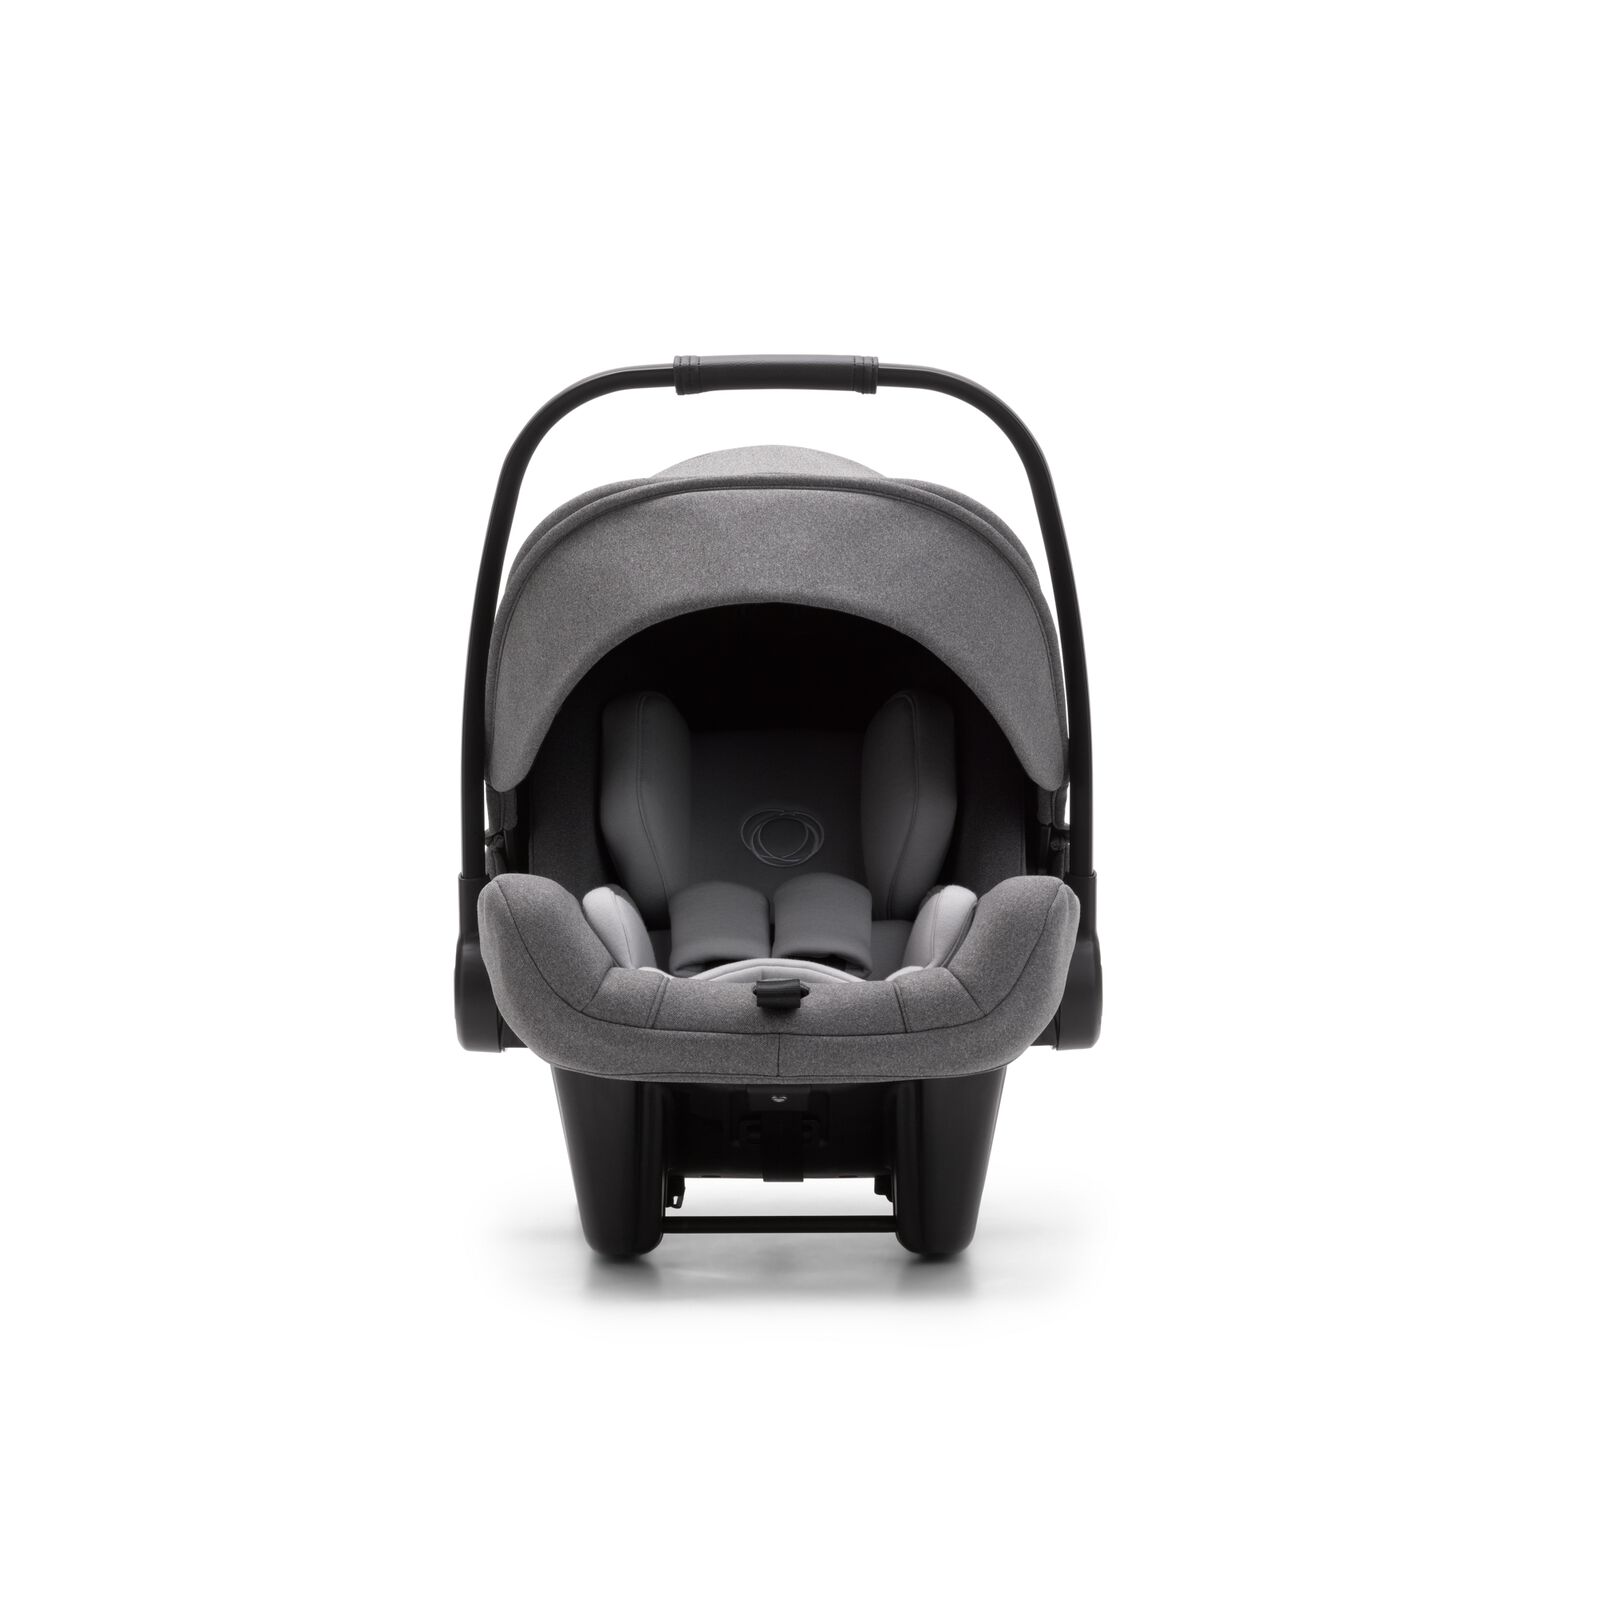 Bugaboo Turtle Air by Nuna car seat with recline base - View 6